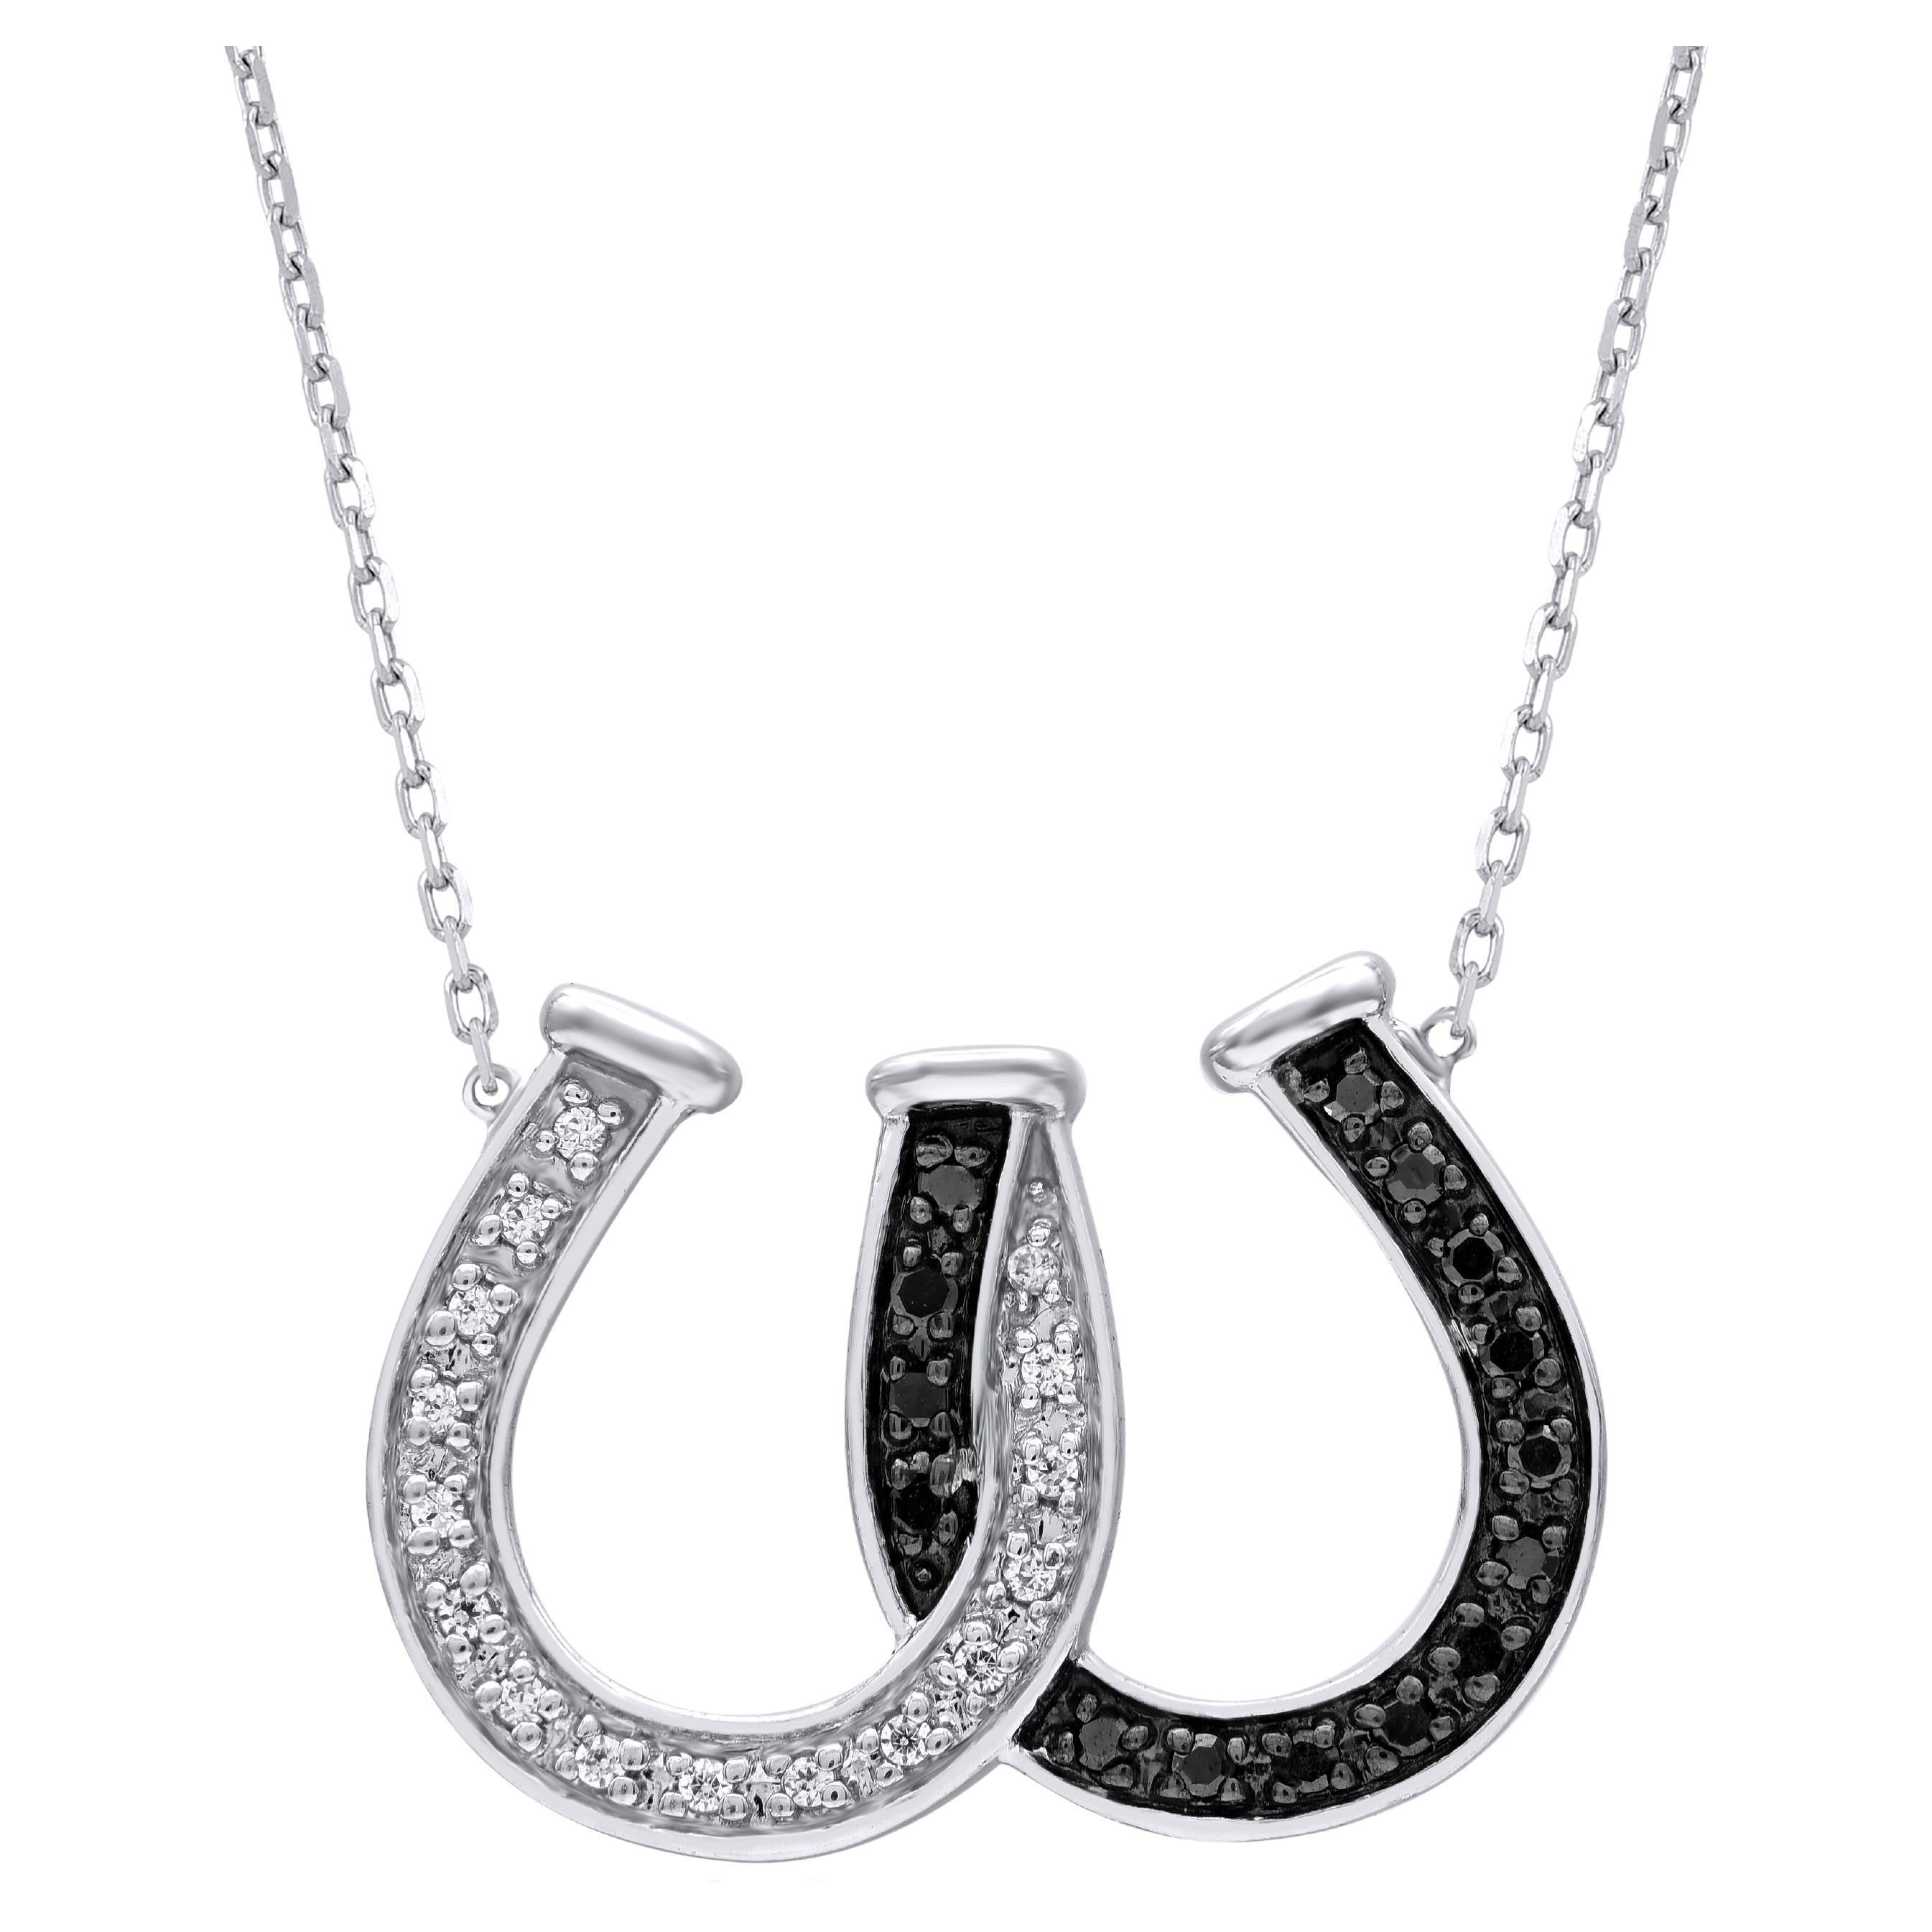 TJD 0.10 Natural Round Cut Diamond 14KT White Gold Horseshoe Pendant Necklace For Sale